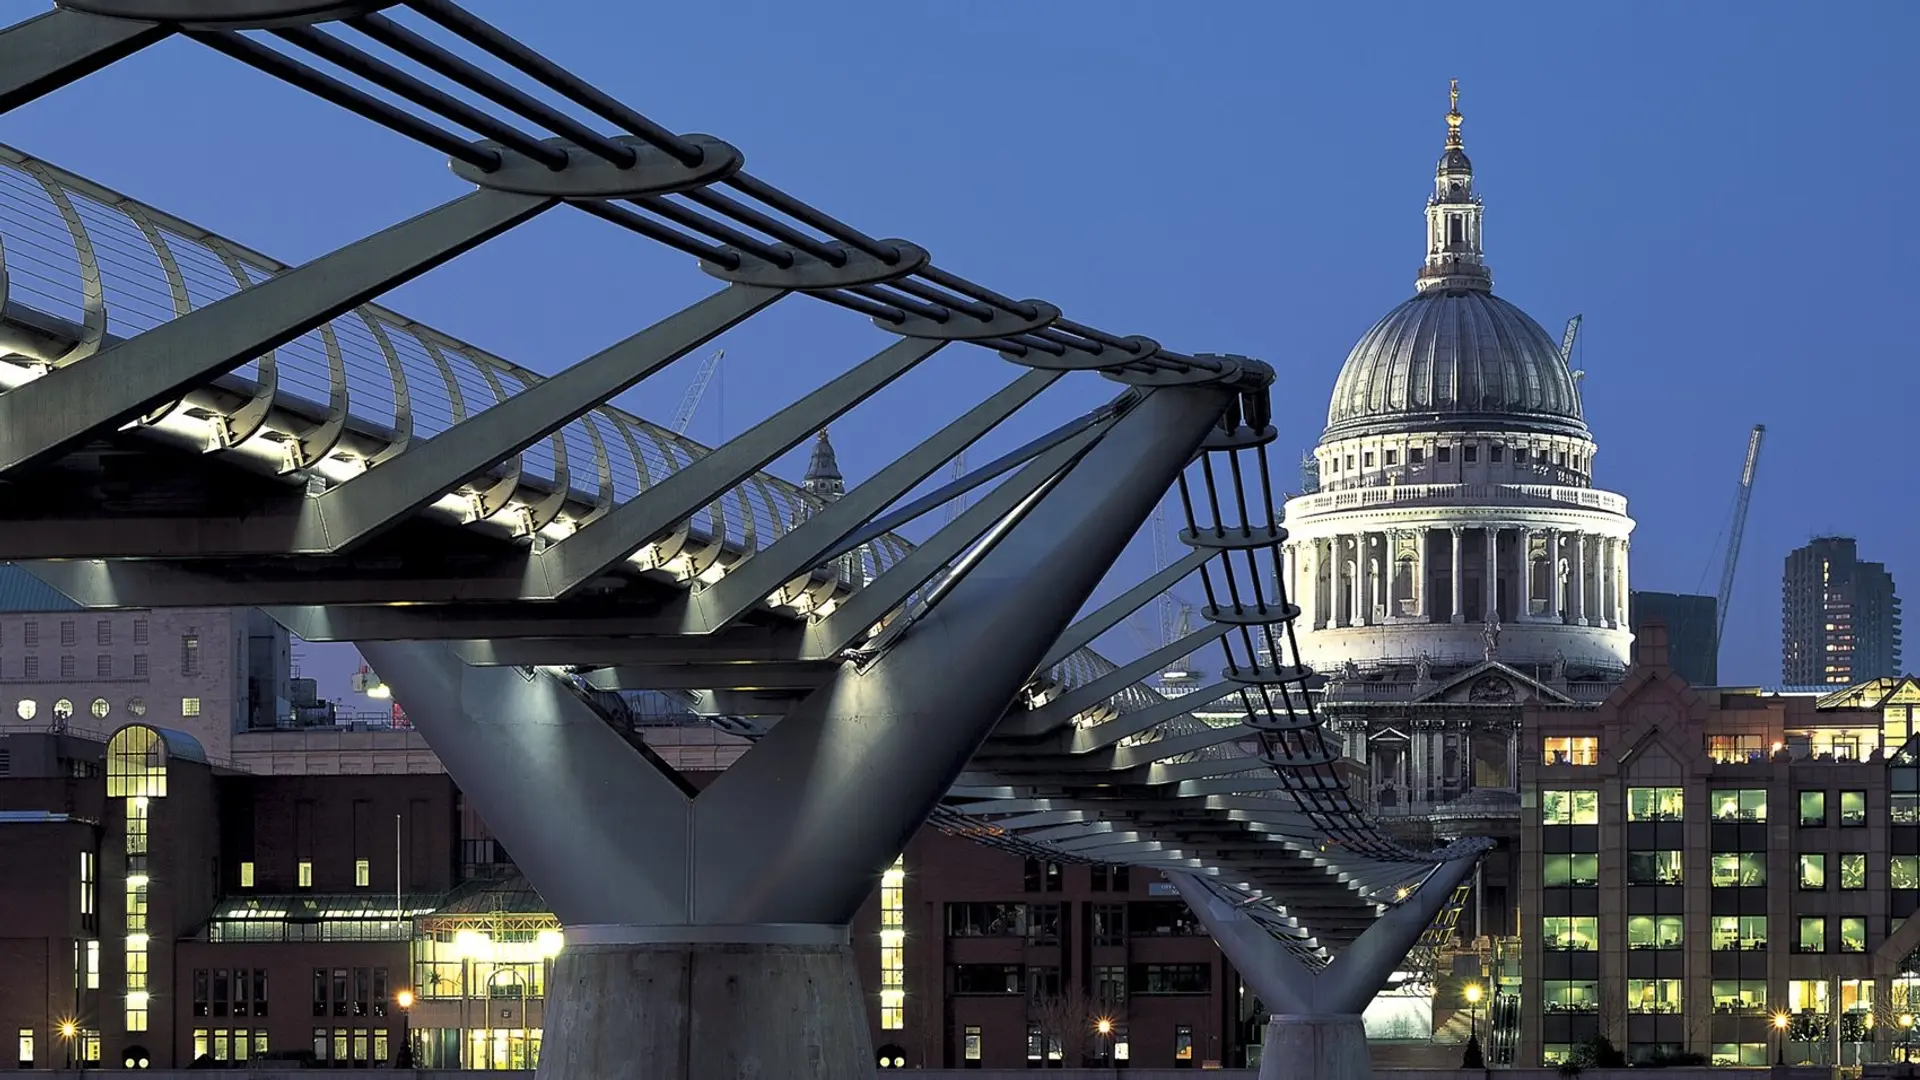 Millennium Bridge is one of the best things to see in London